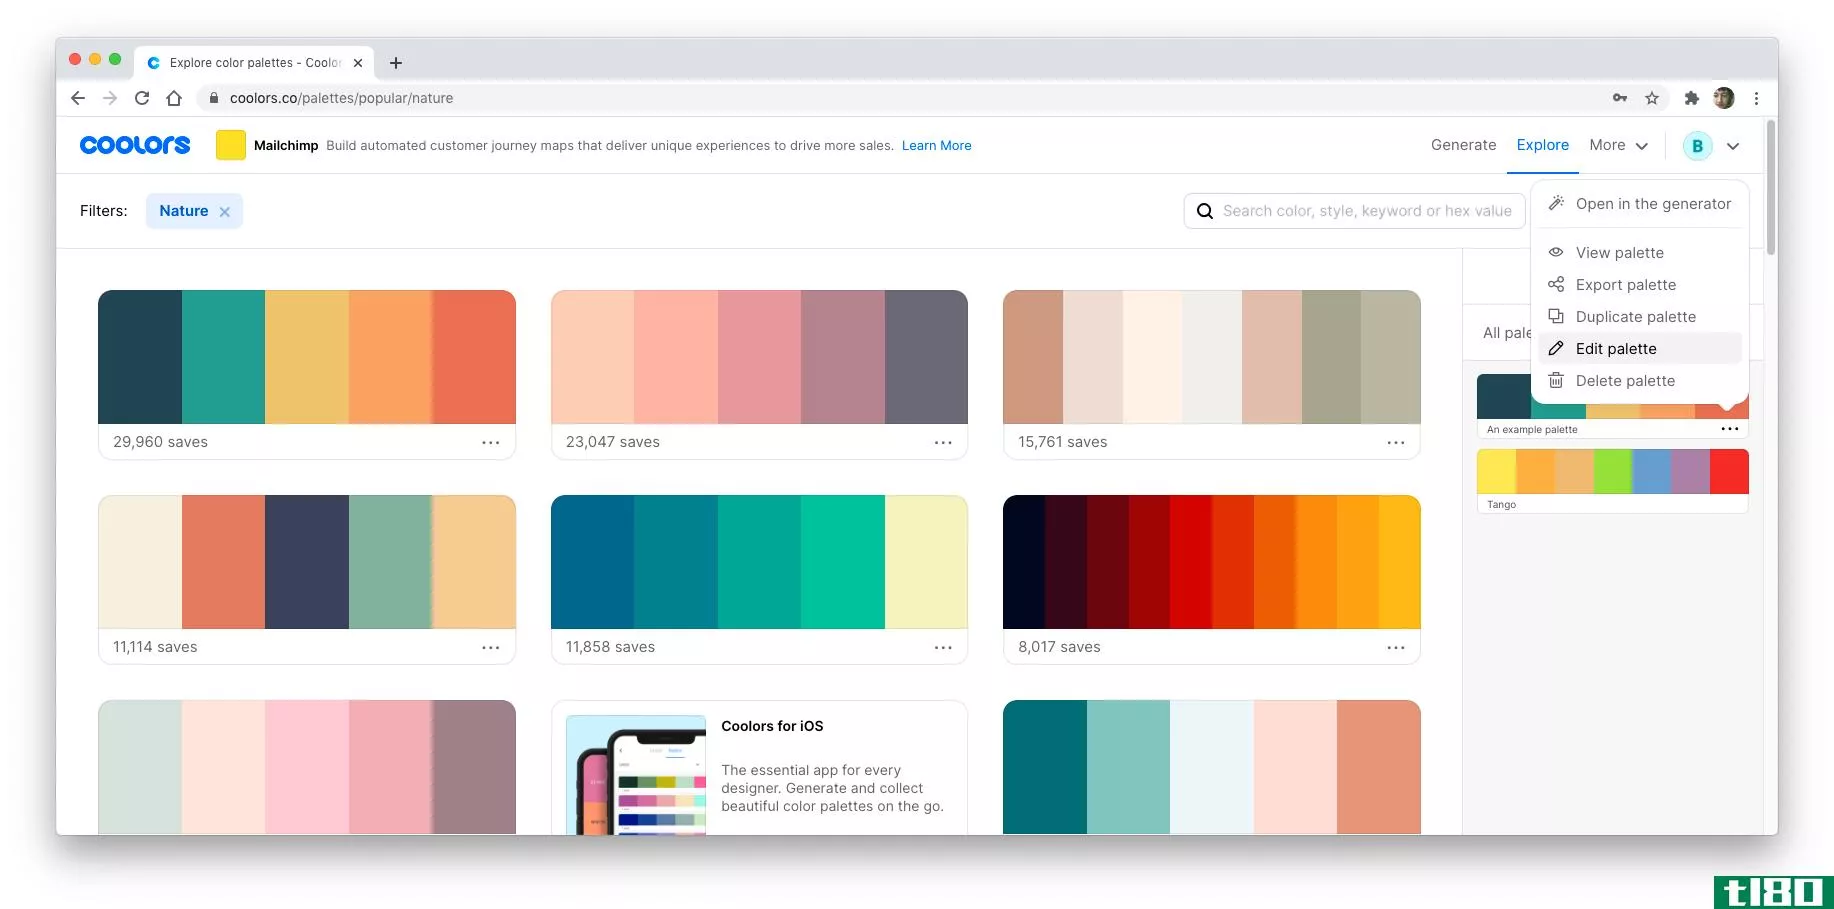 A screenshot showing how to edit a saved palette on Coolors.co